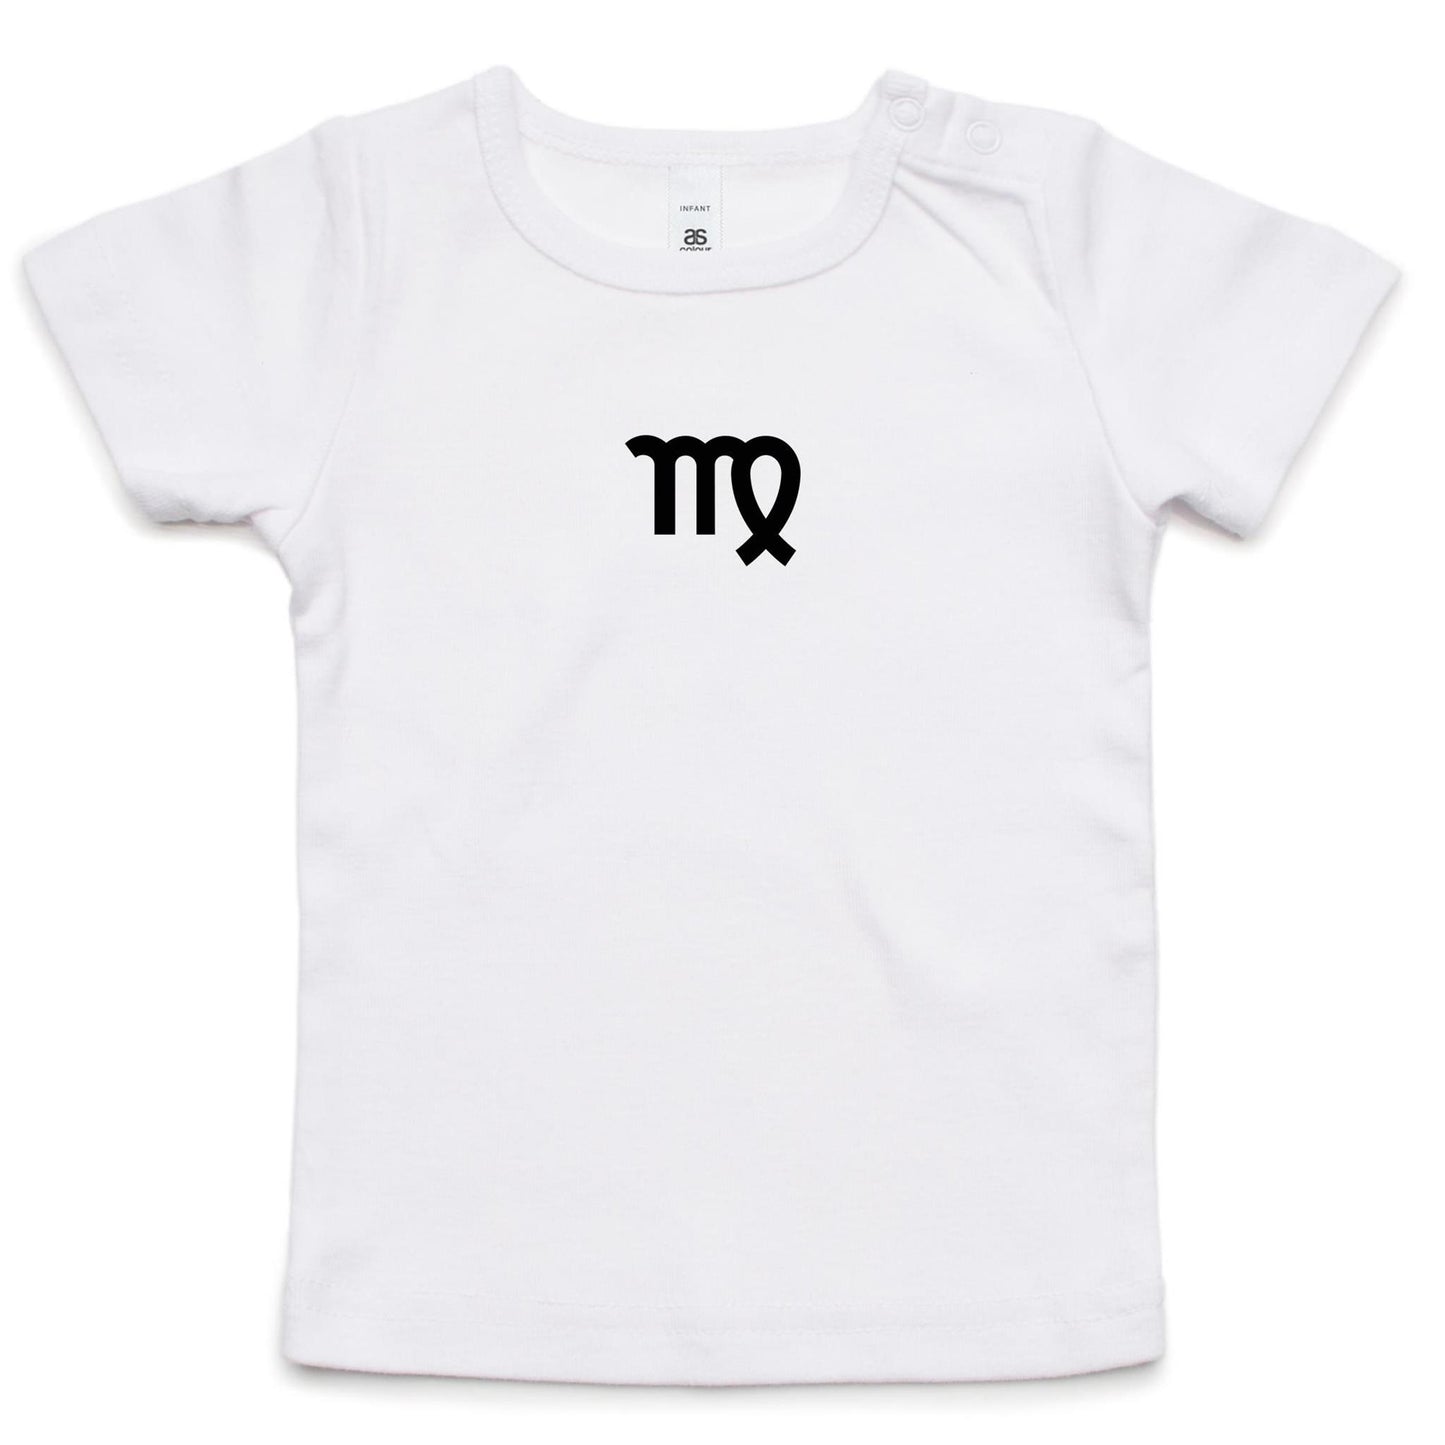 Virgo T Shirts for Babies